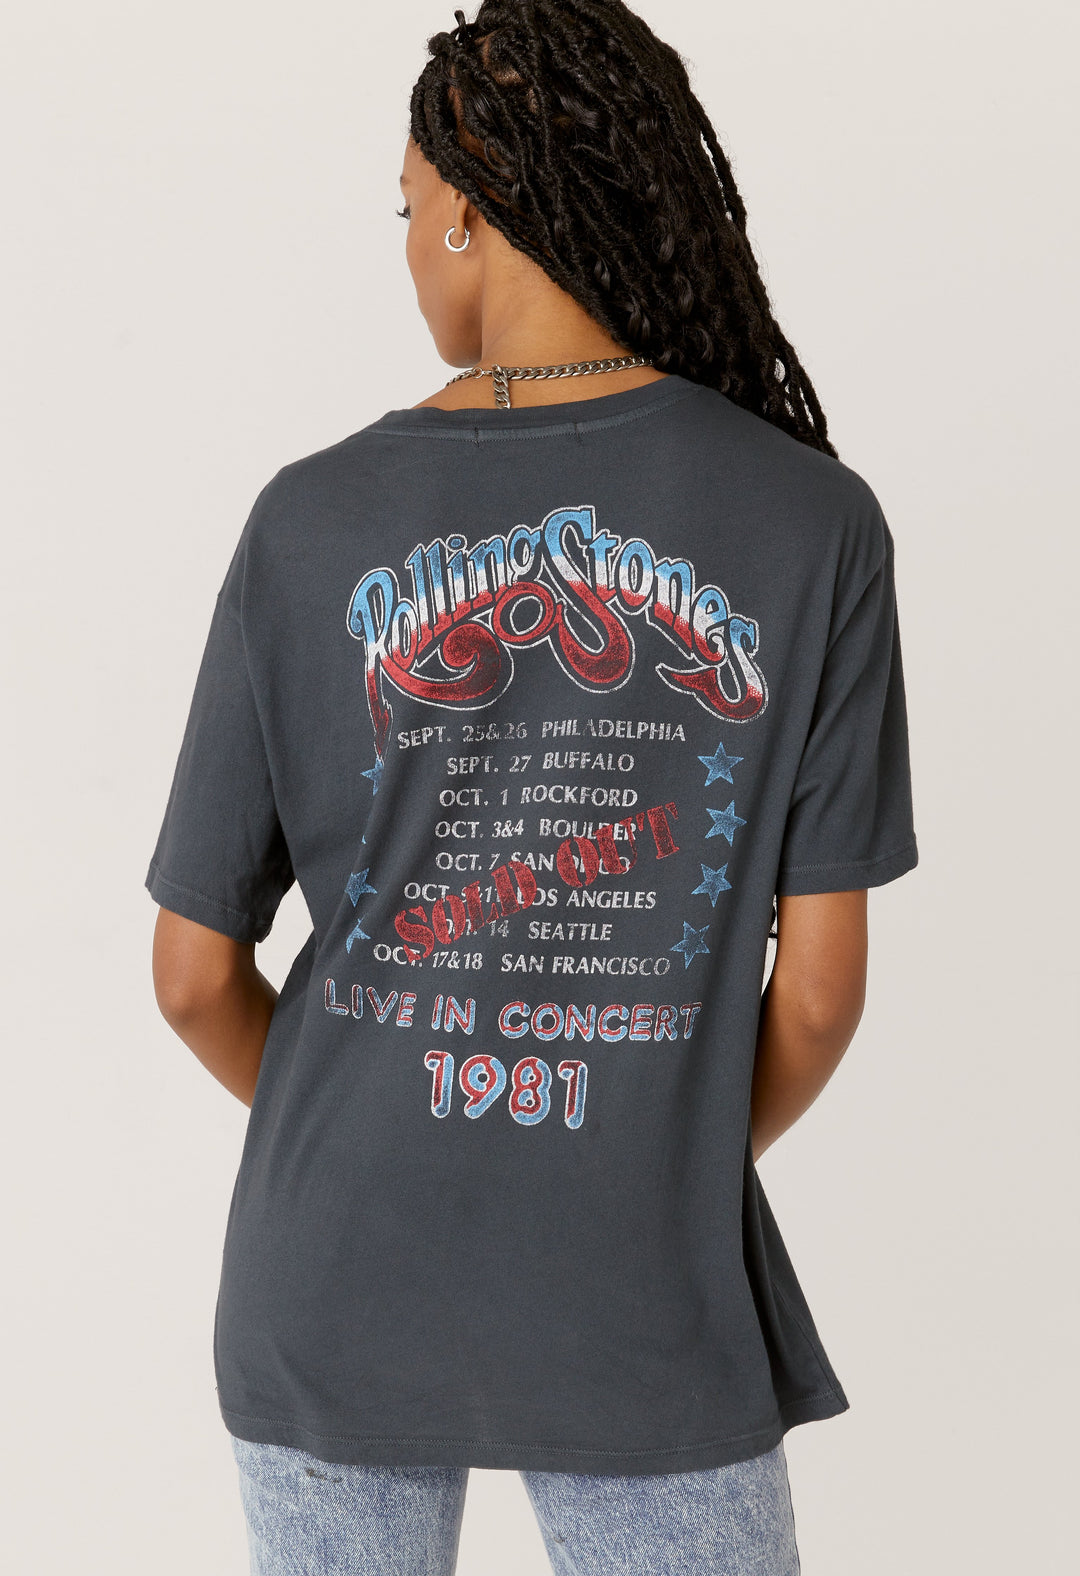 THE ROLLING STONES 1981 BOYFRIEND TEE - Kingfisher Road - Online Boutique